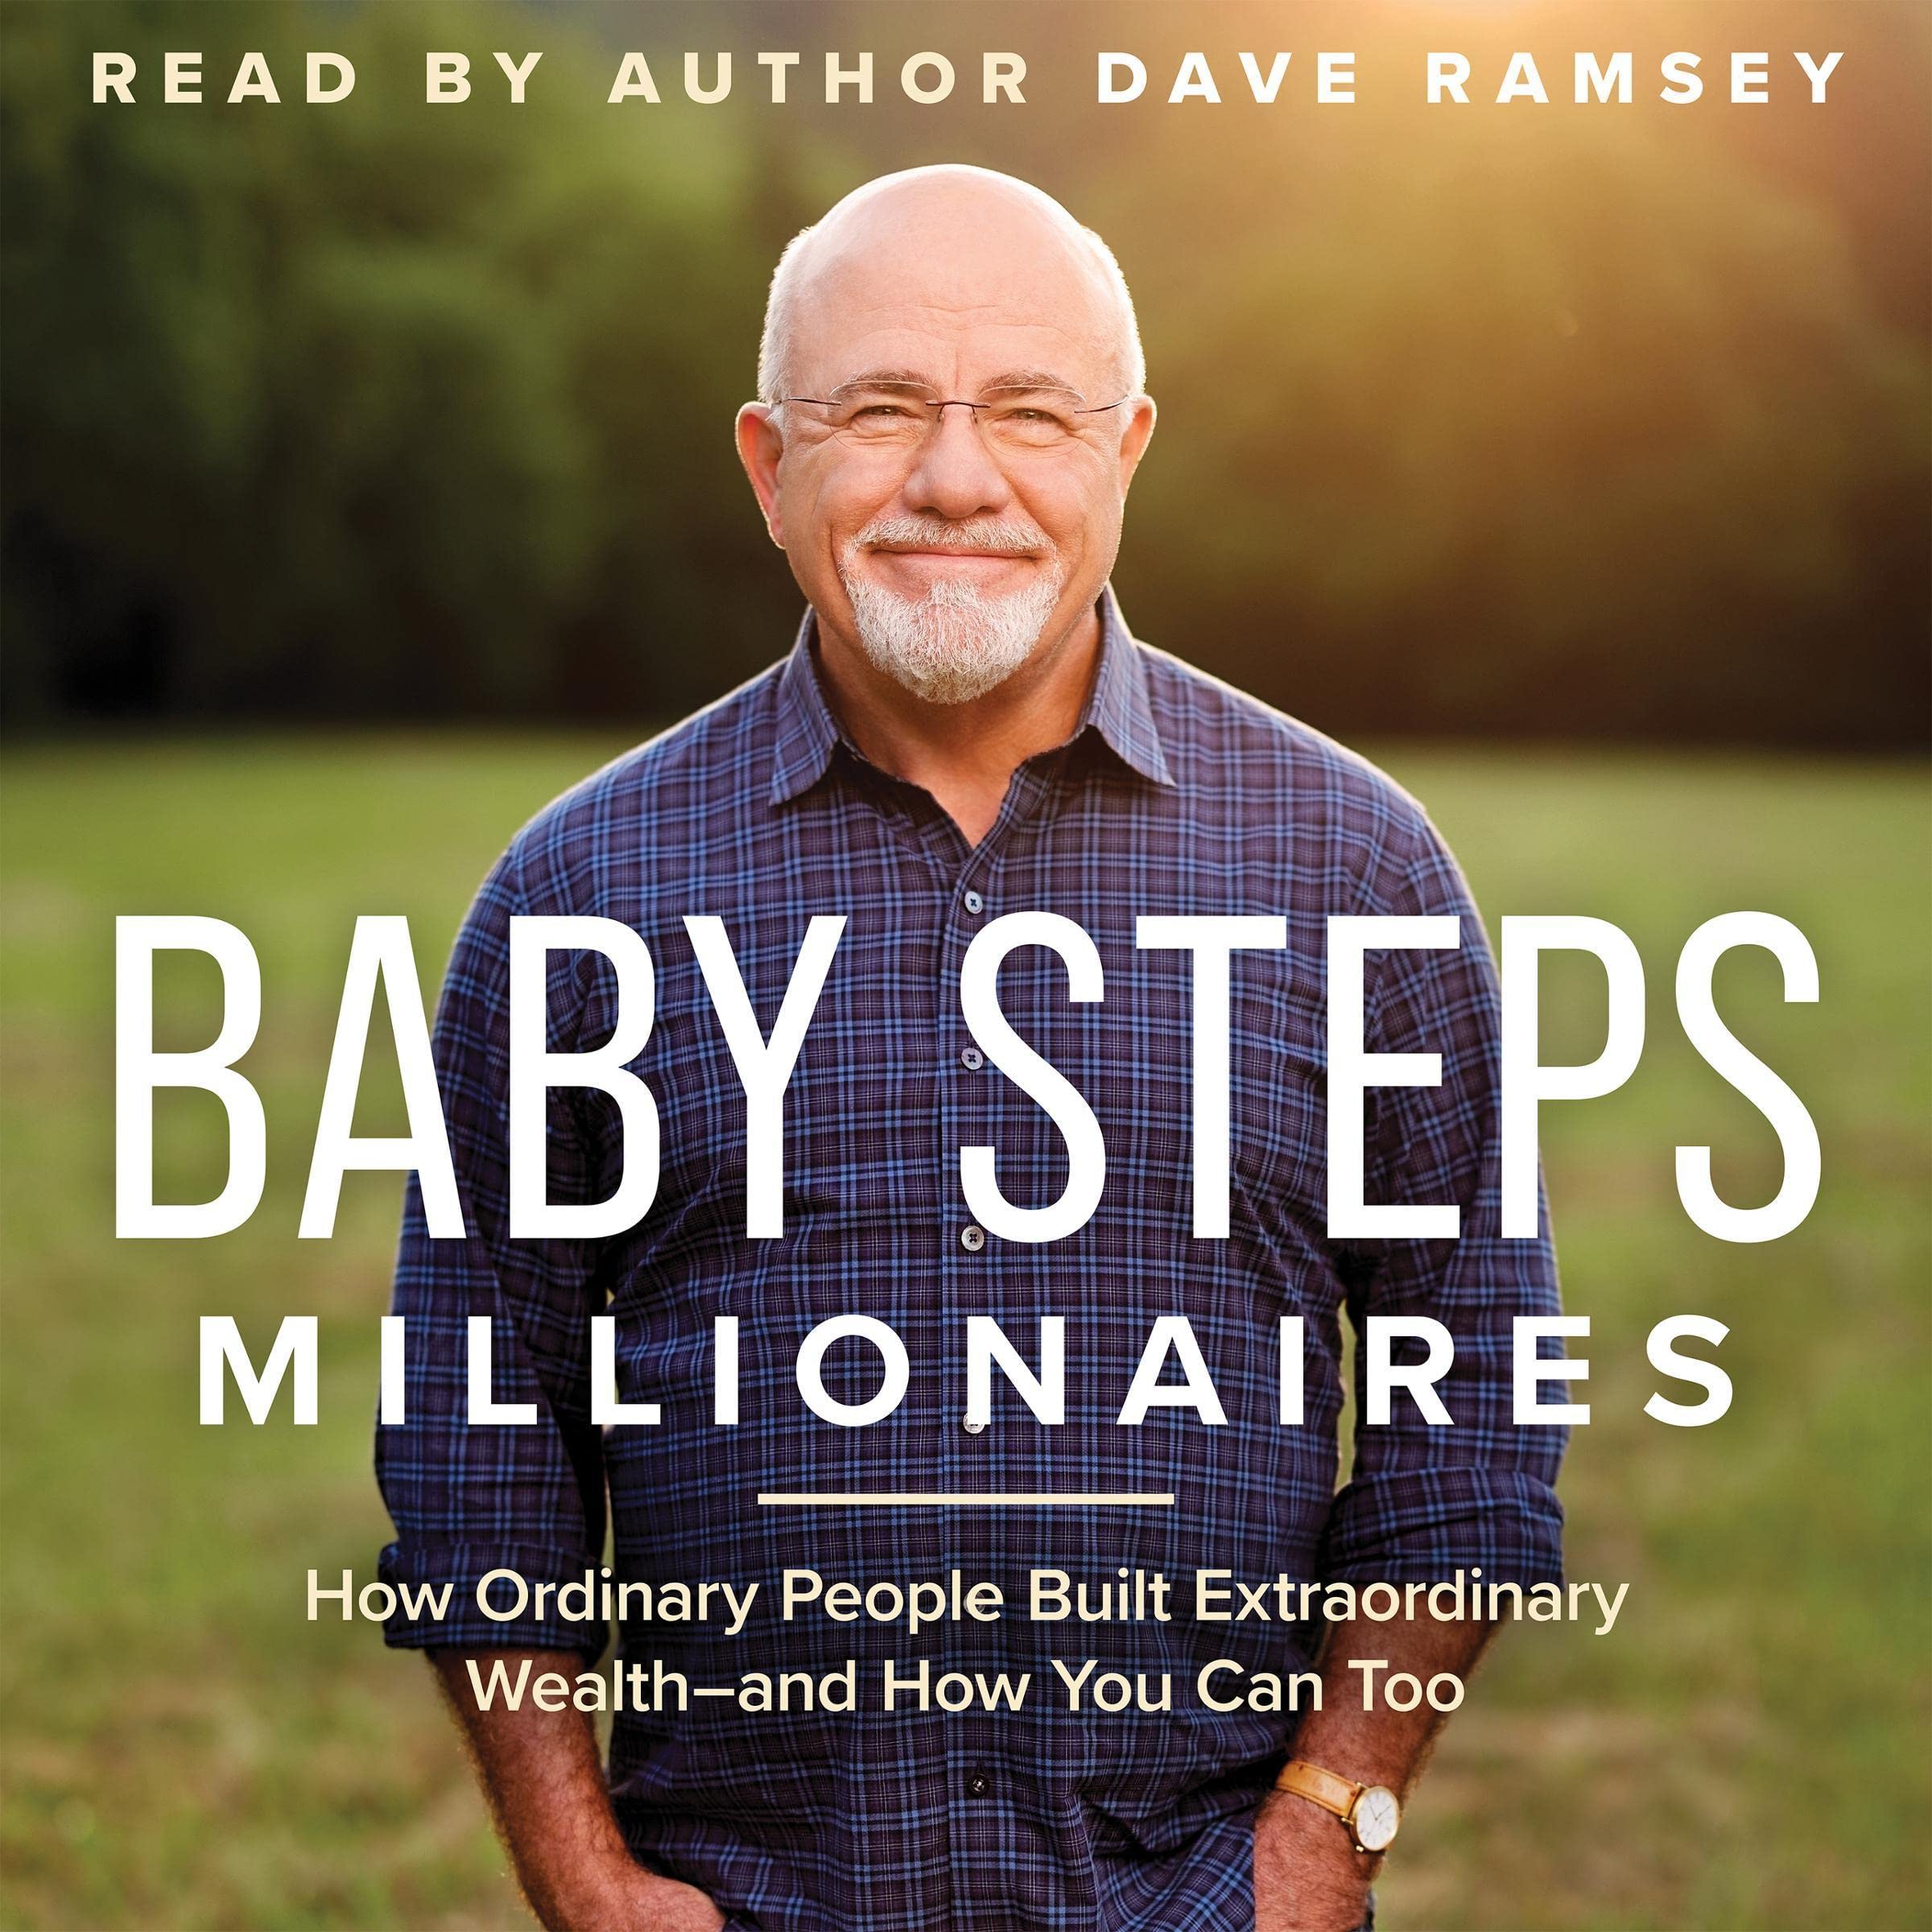 Baby Steps Millionaires: How Ordinary People Built Extraordinary Wealth - and How You Can Too